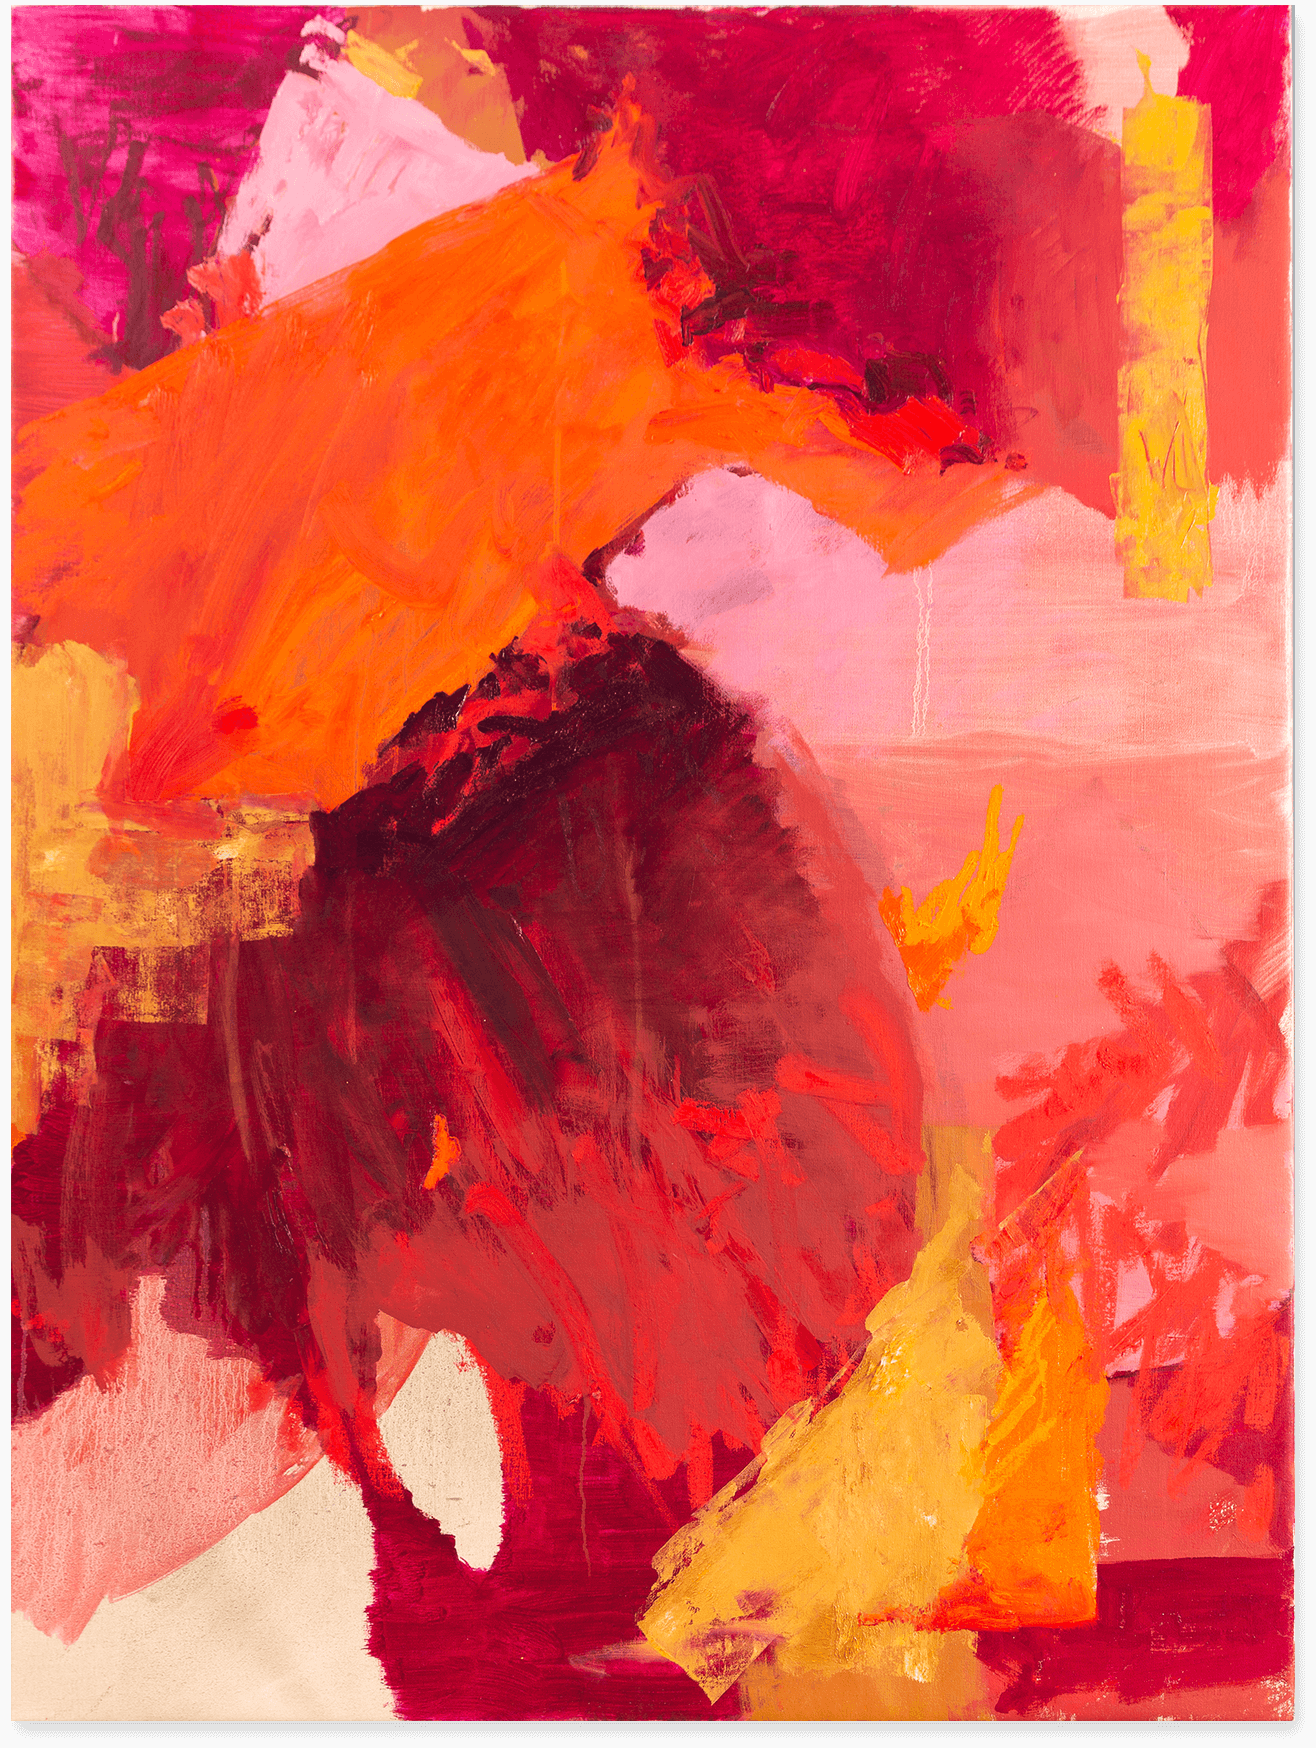 An abstract oil painting in red, orange, ochre and pink